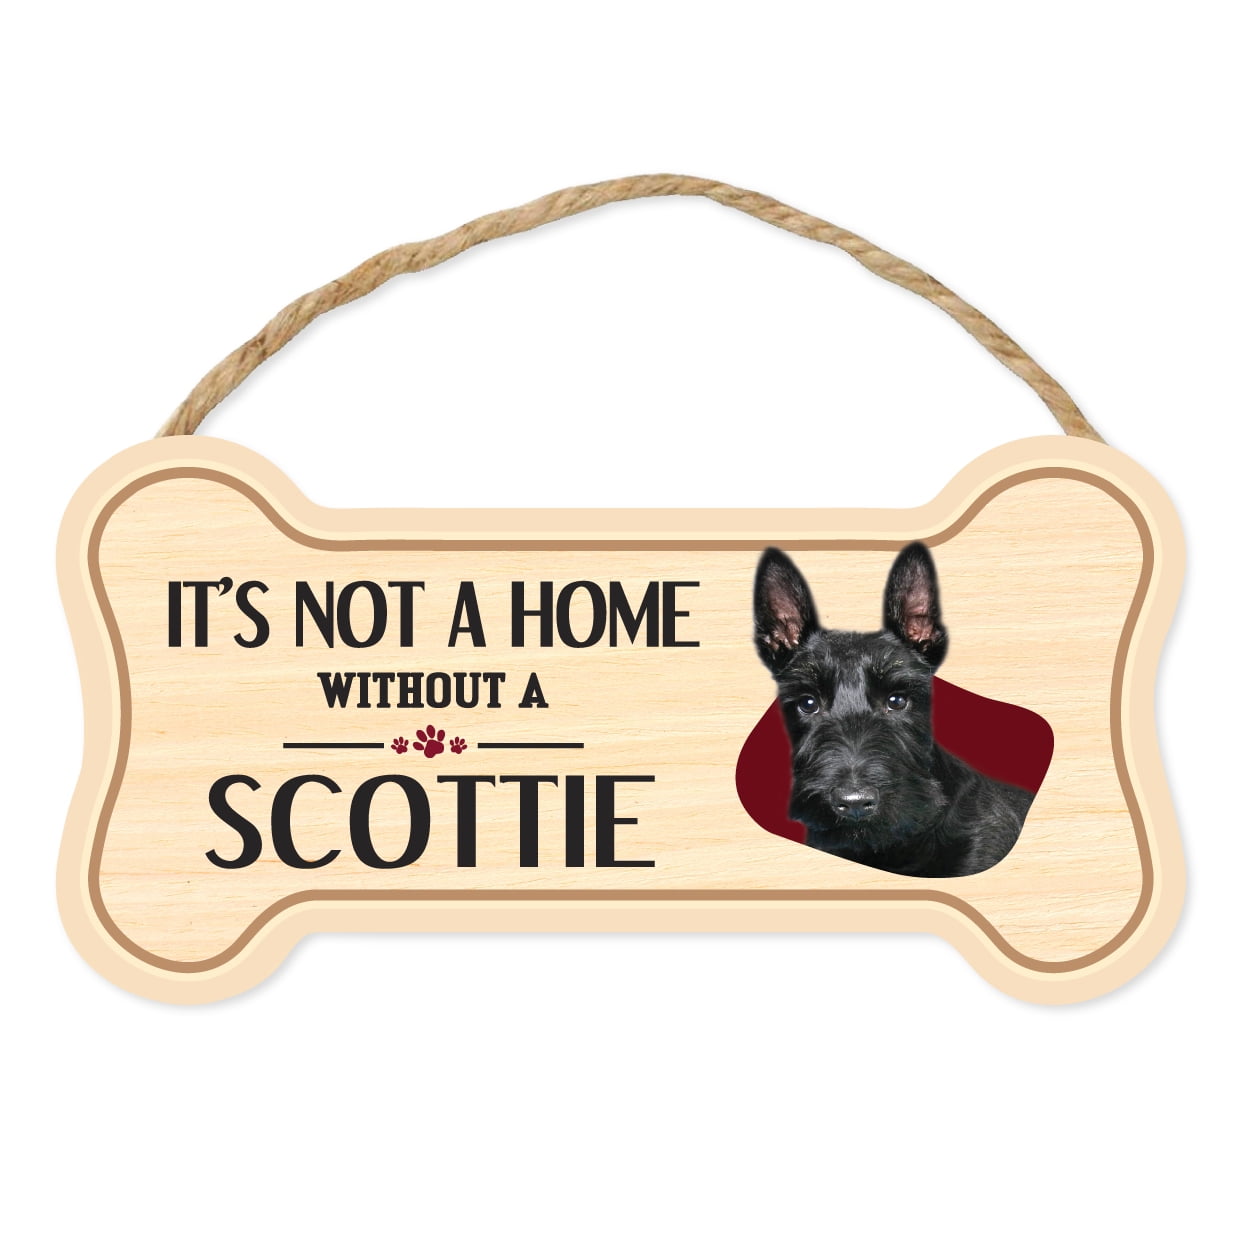 A House is not a Home Scottie 5"x10" Wood Plaque Dog Sign Home Decor 